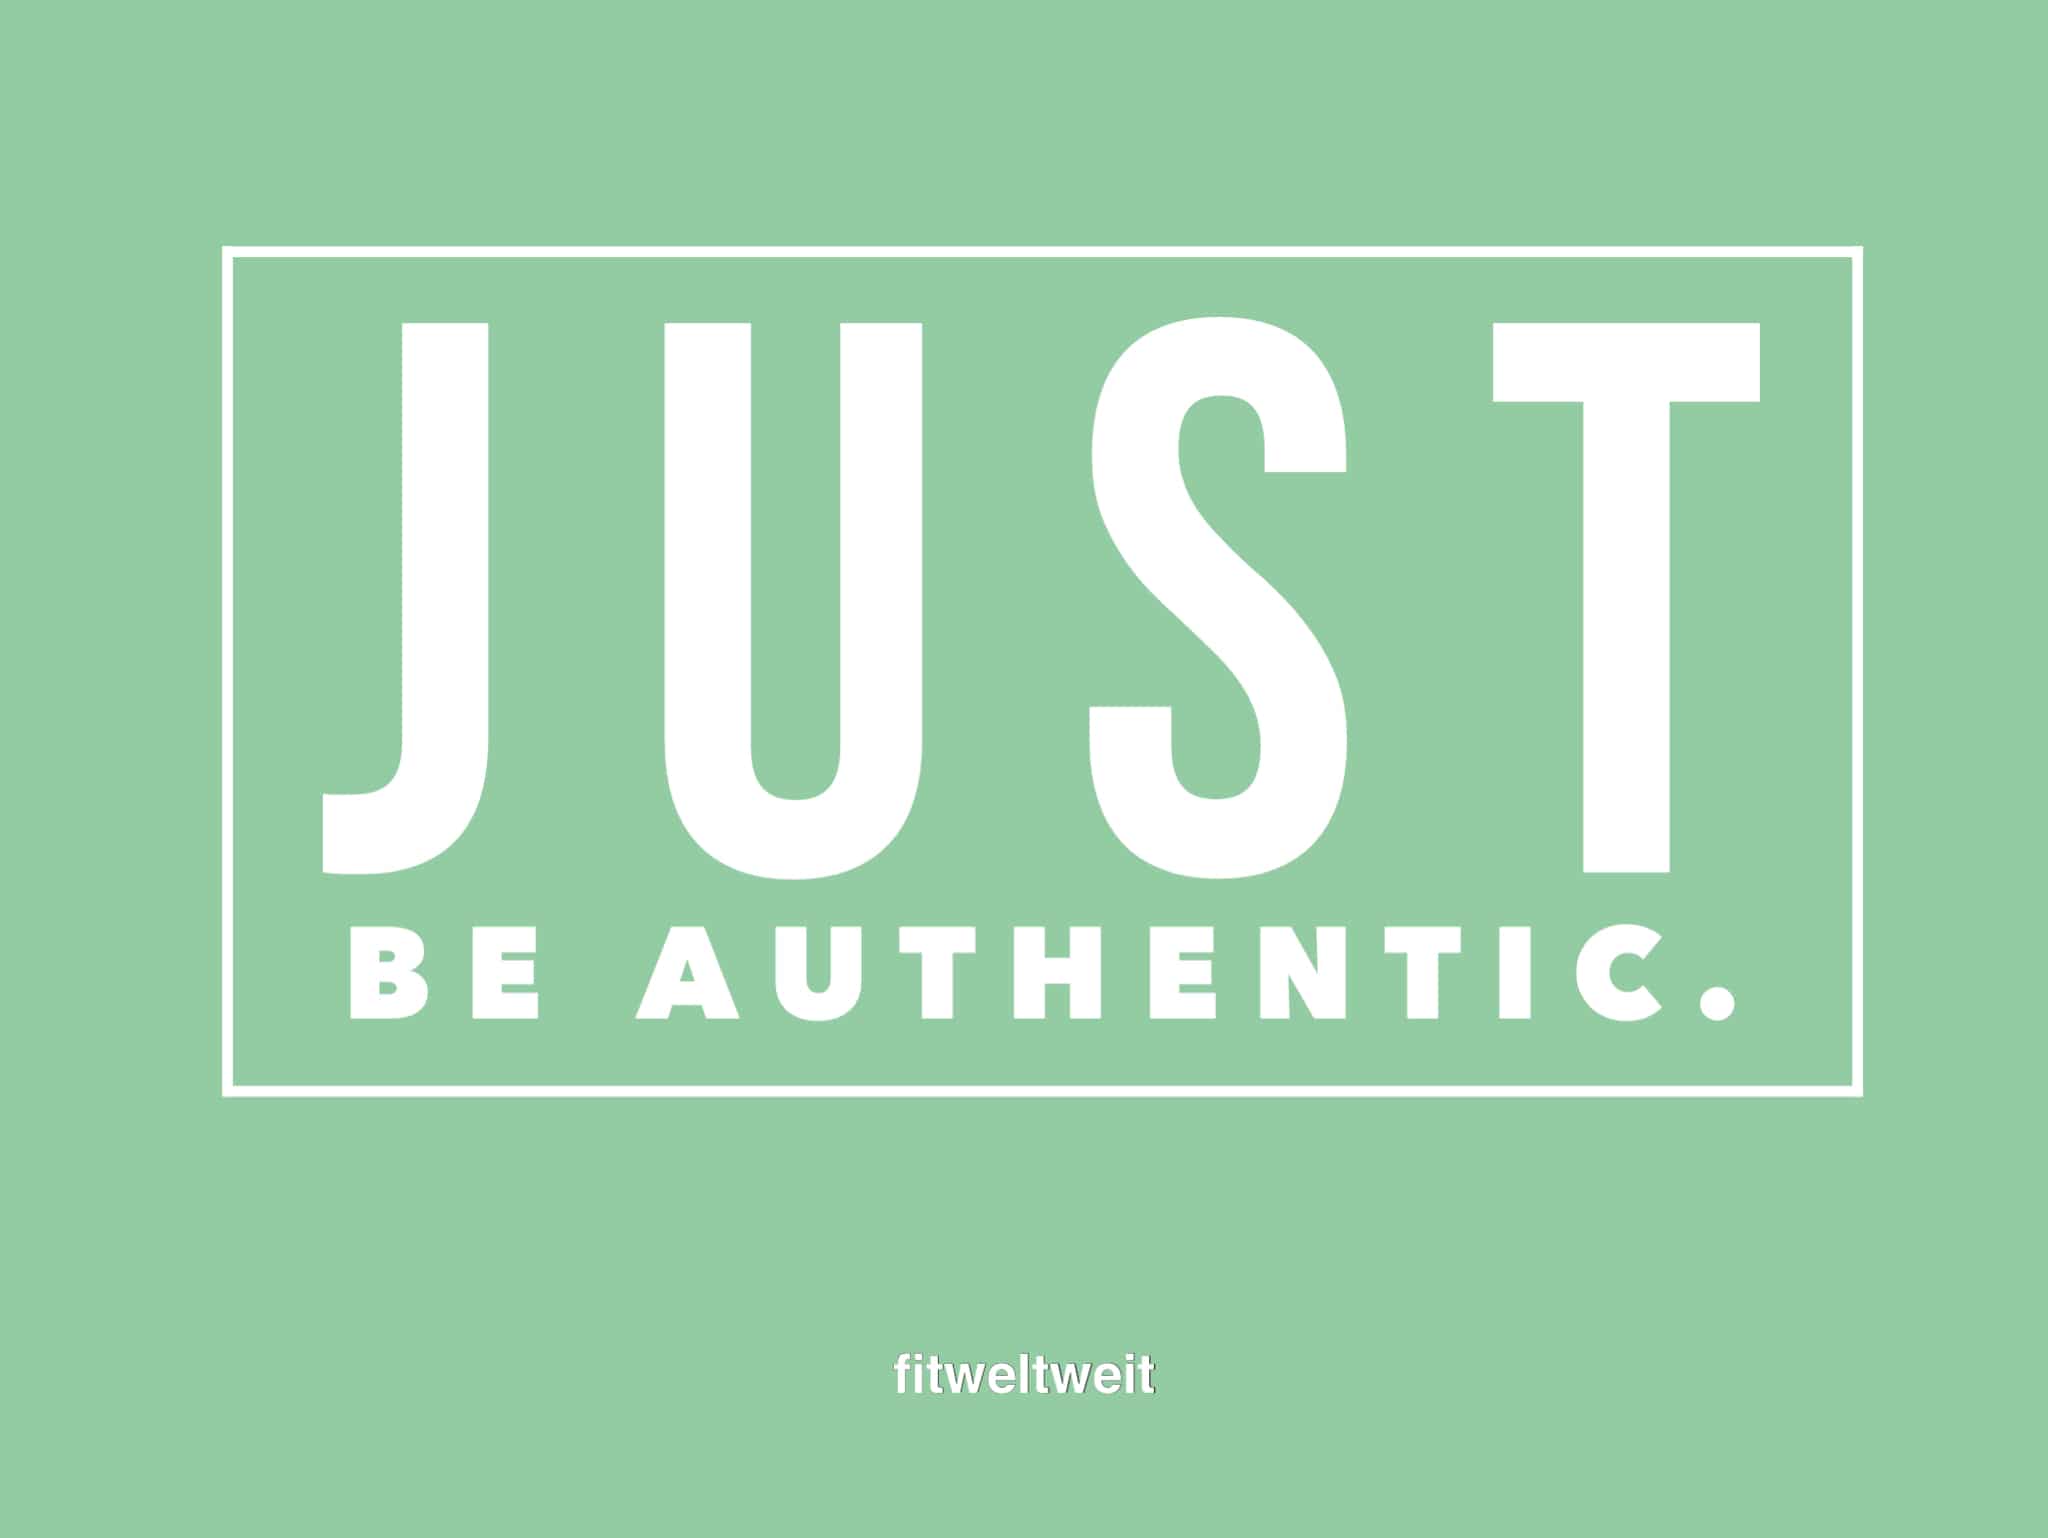 Just be authentic!